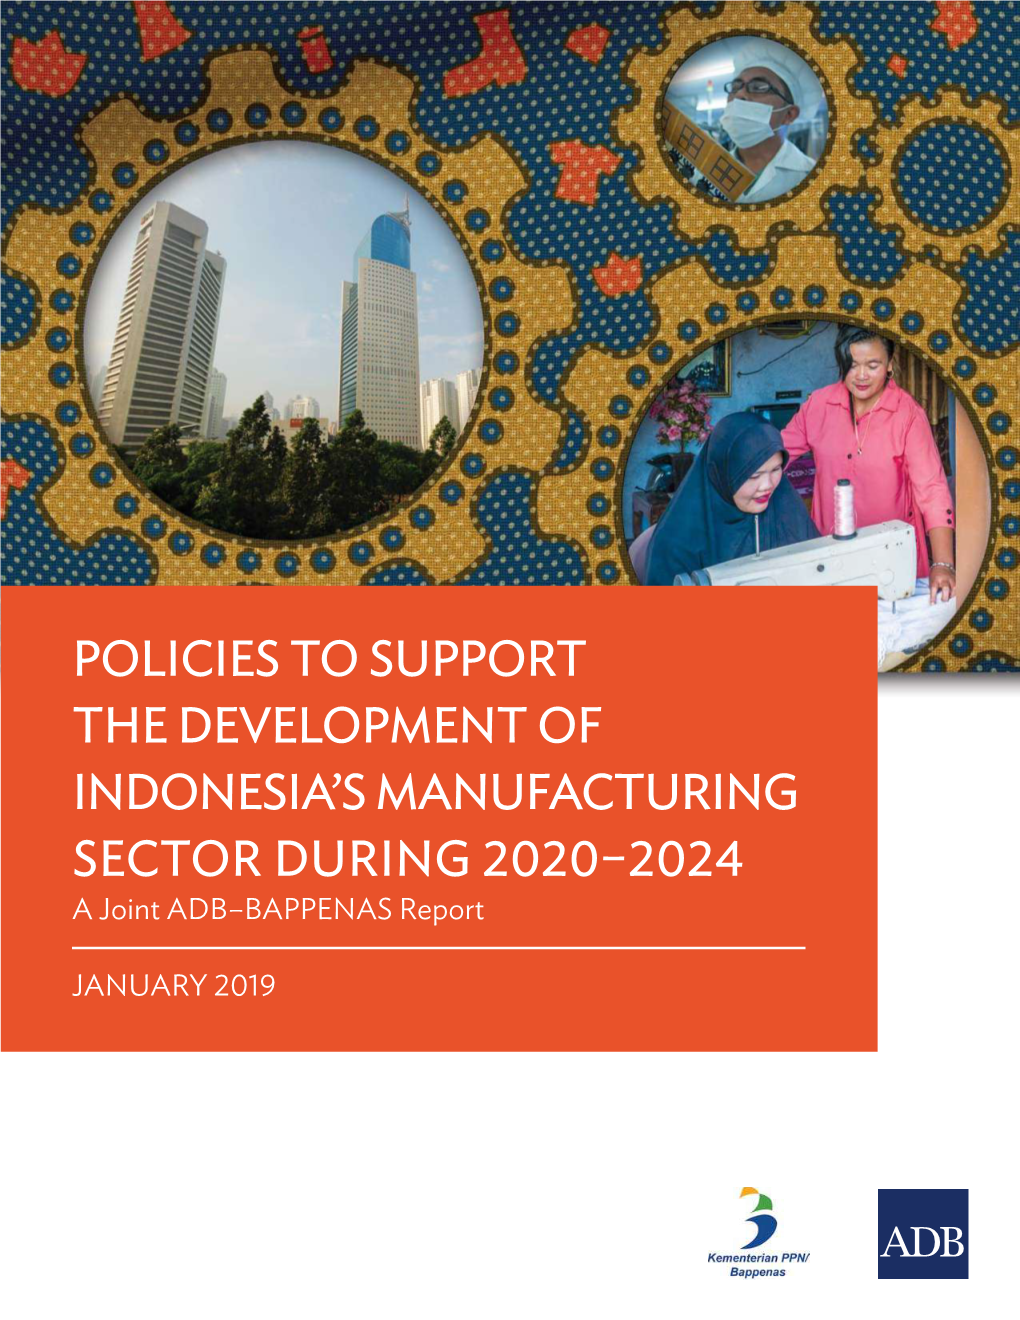 Policies to Support the Development of Indonesia's Manufacturing